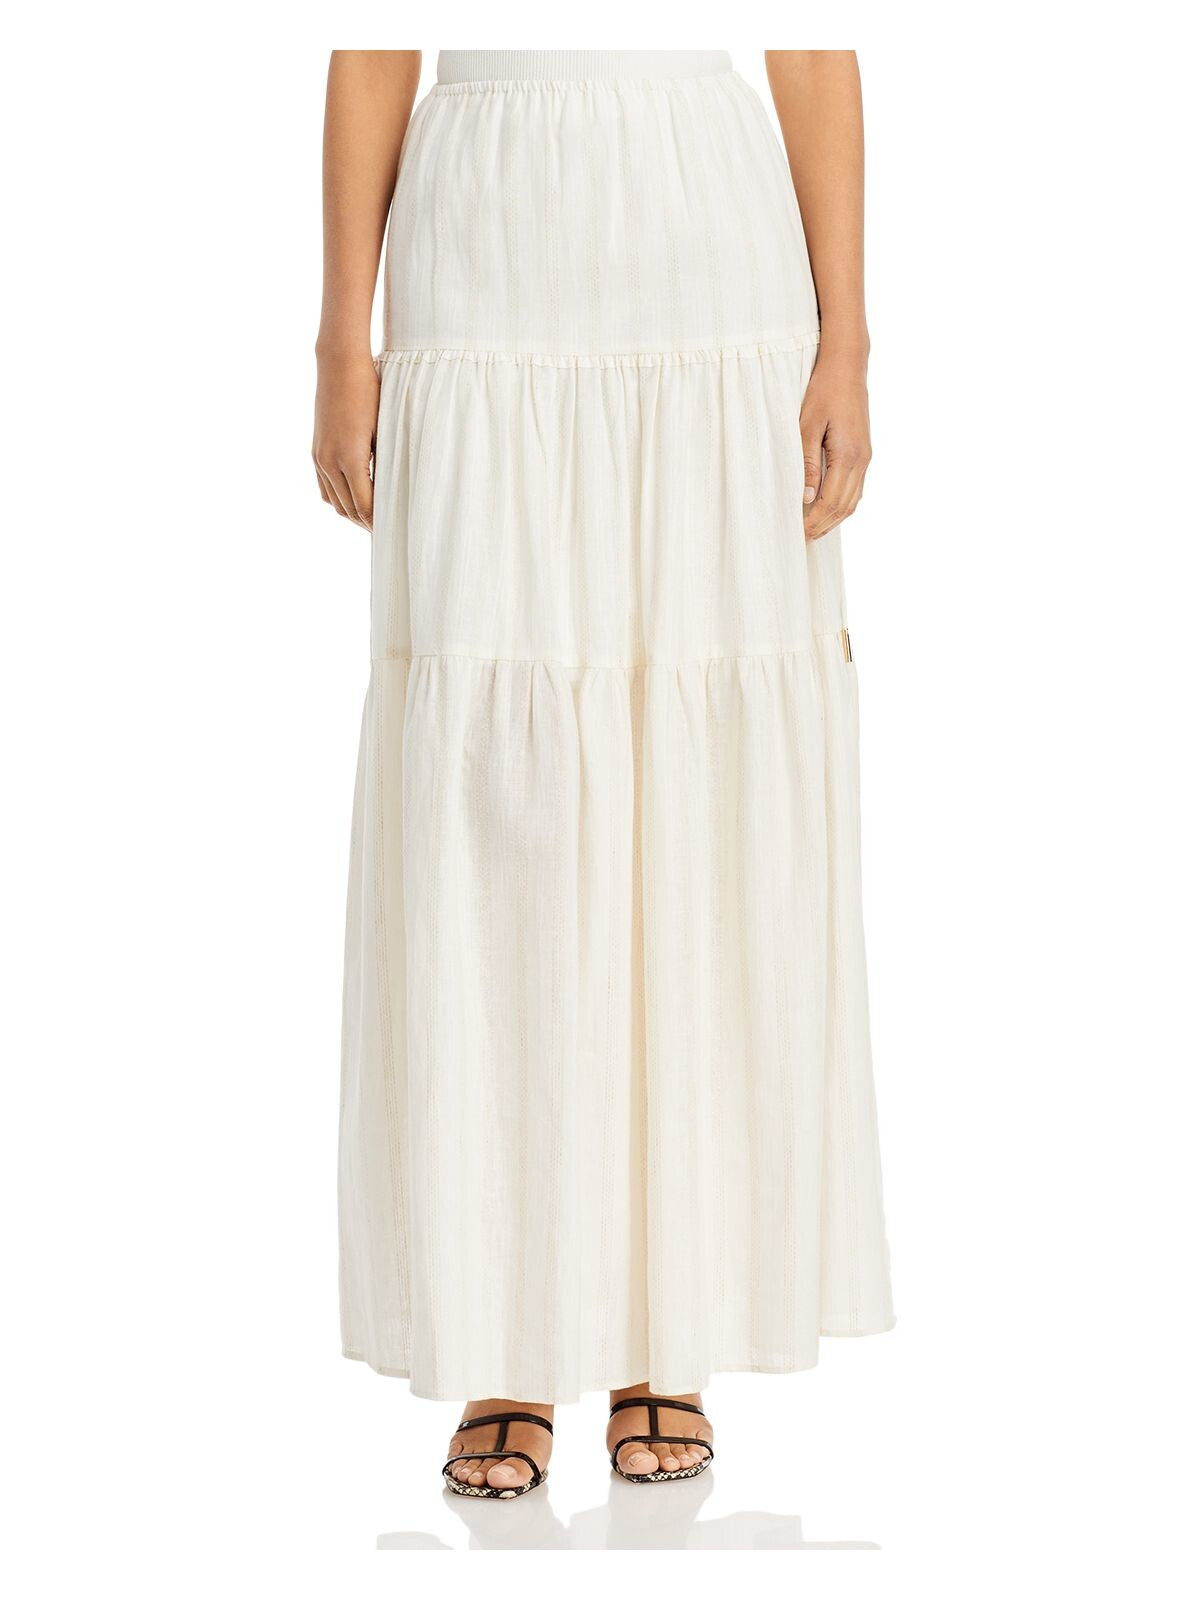 SIGNIFICANT OTHER Womens Ivory Tie Maxi Skirt 4